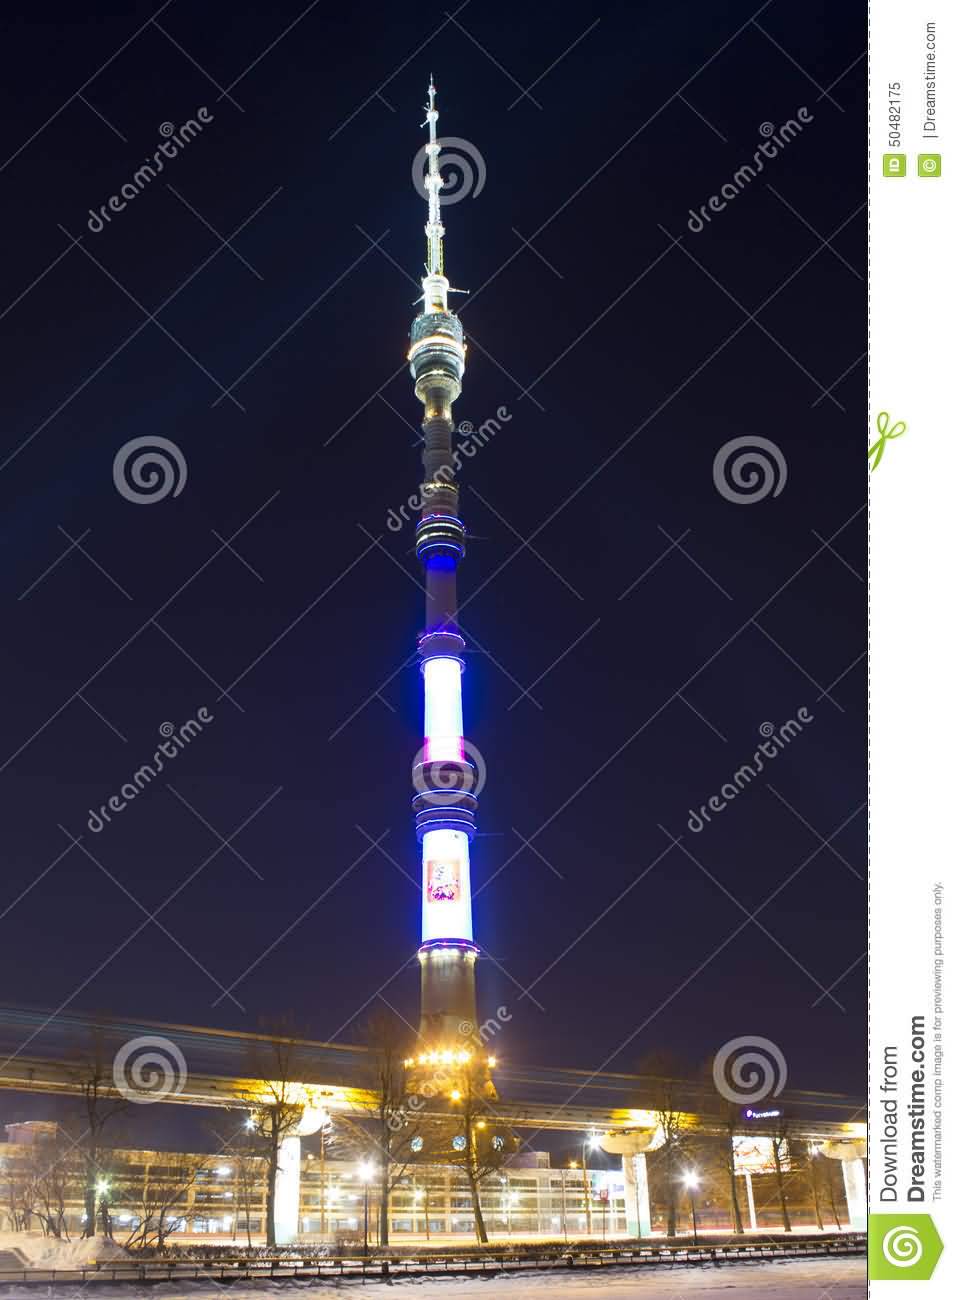 Ostankino Tower In Moscow Lit Up At Night